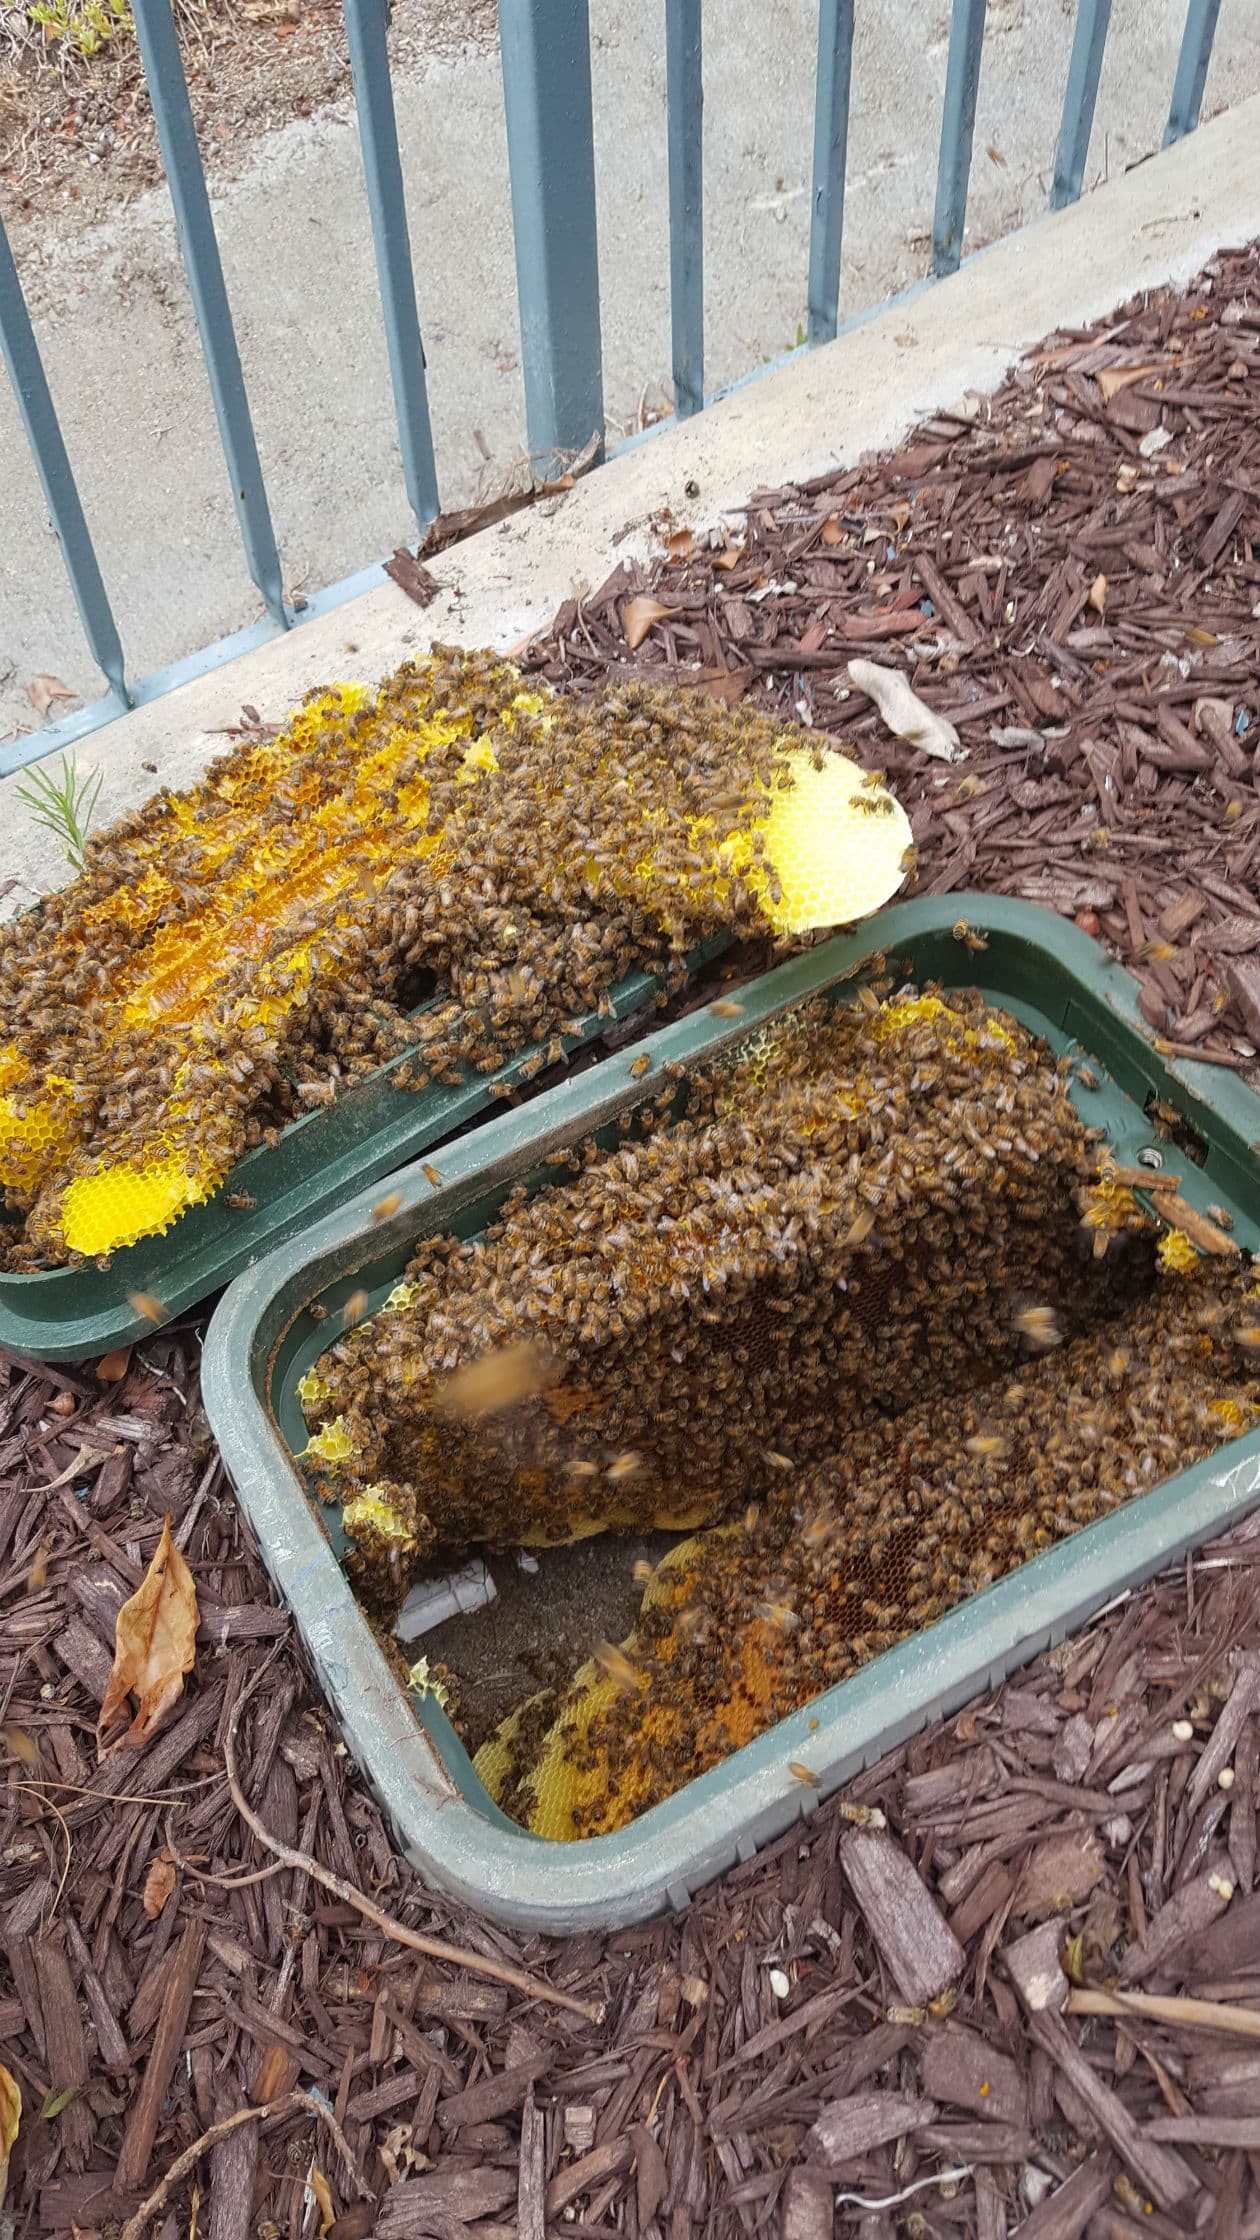 Live Bee Removal in Water Valve Box